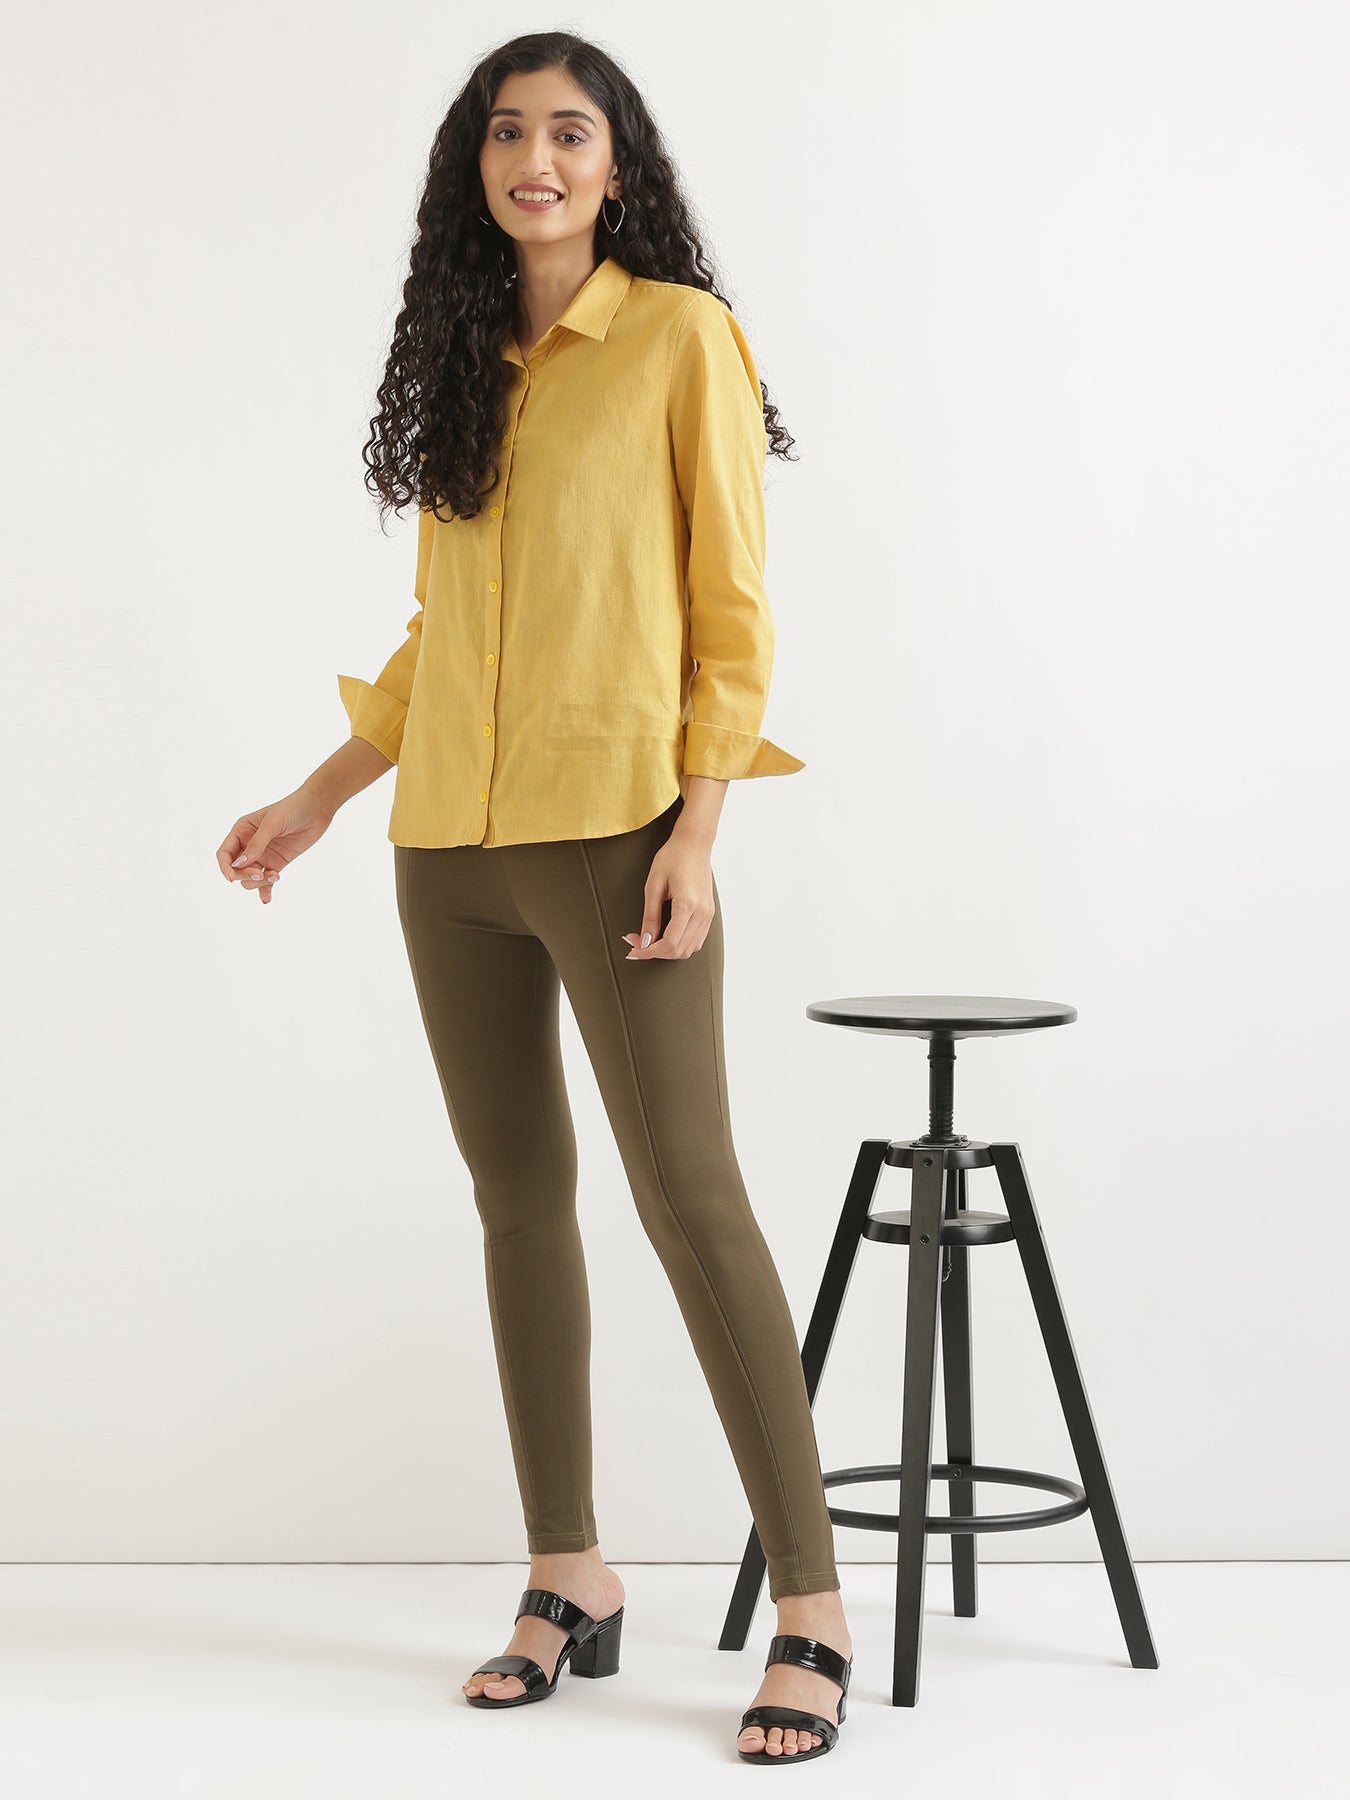 Olive Green 4-Way Stretchable Pants